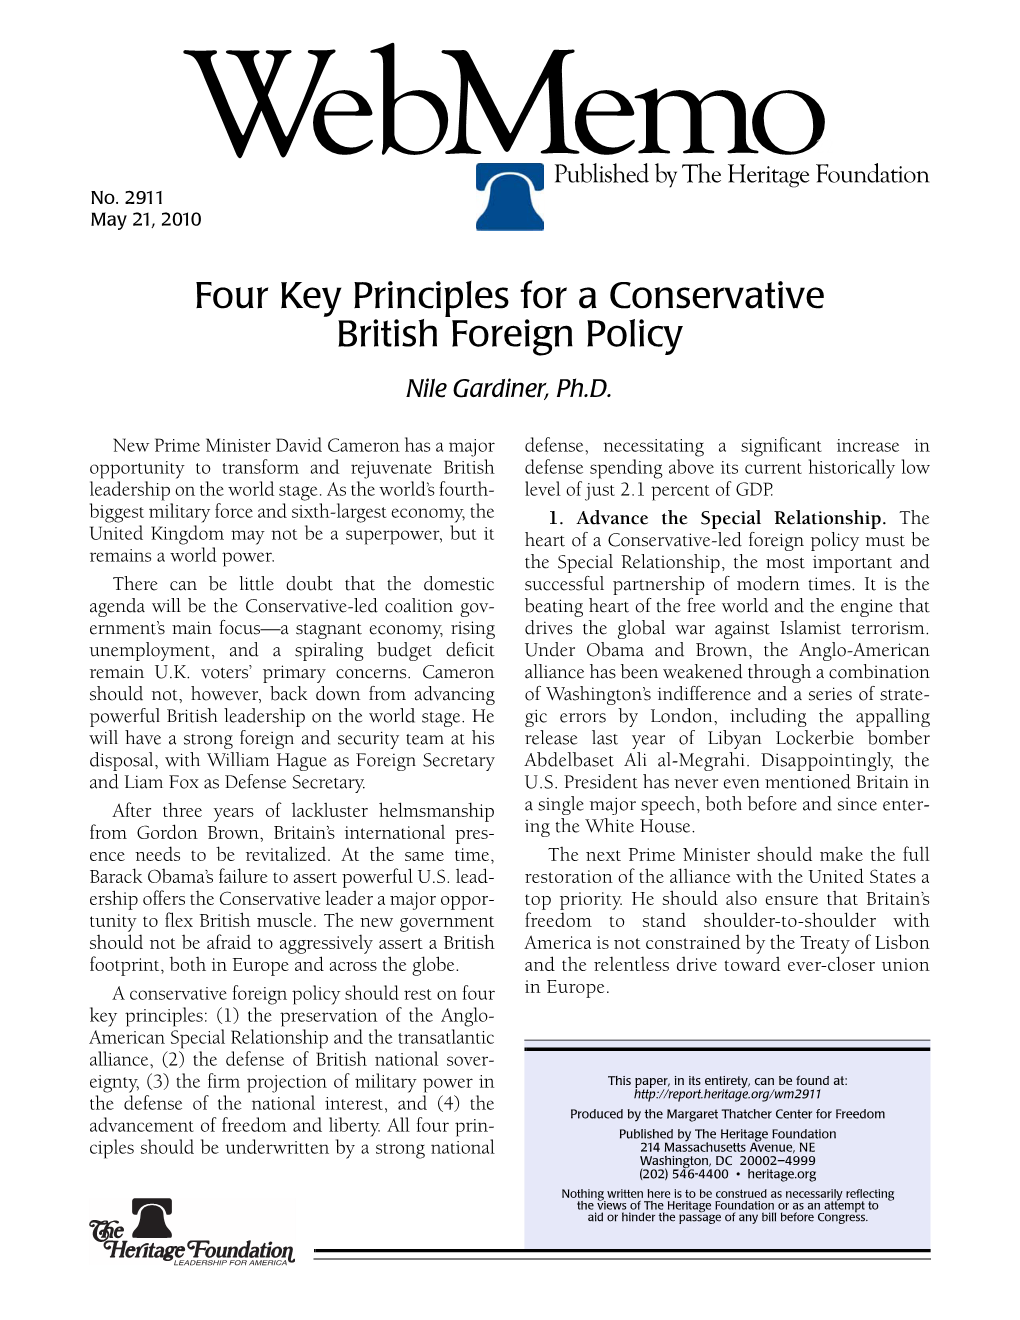 Four Key Principles for a Conservative British Foreign Policy Nile Gardiner, Ph.D